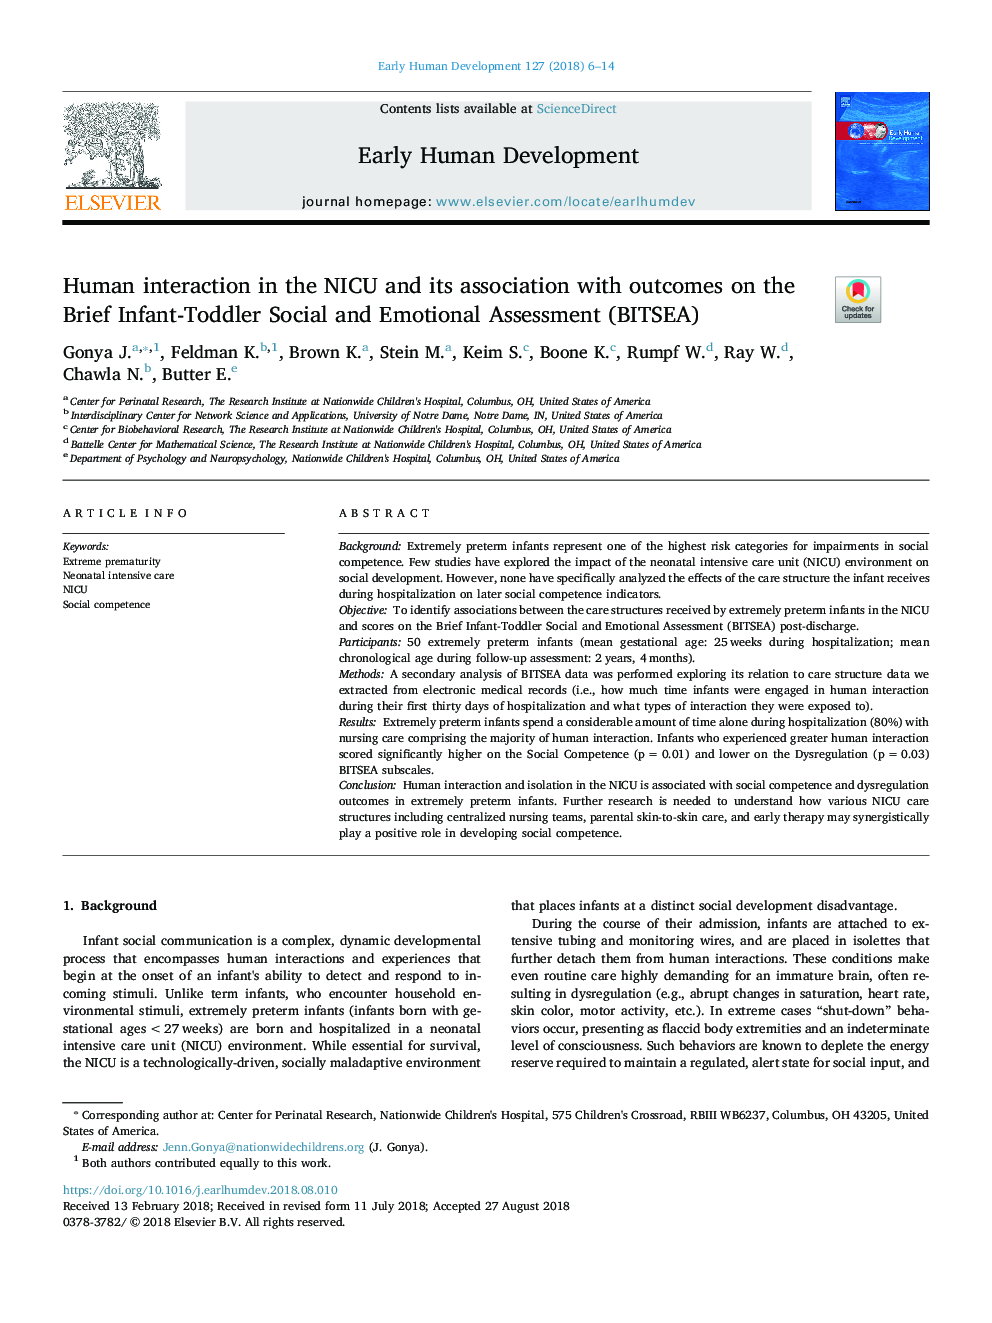 Human interaction in the NICU and its association with outcomes on the Brief Infant-Toddler Social and Emotional Assessment (BITSEA)